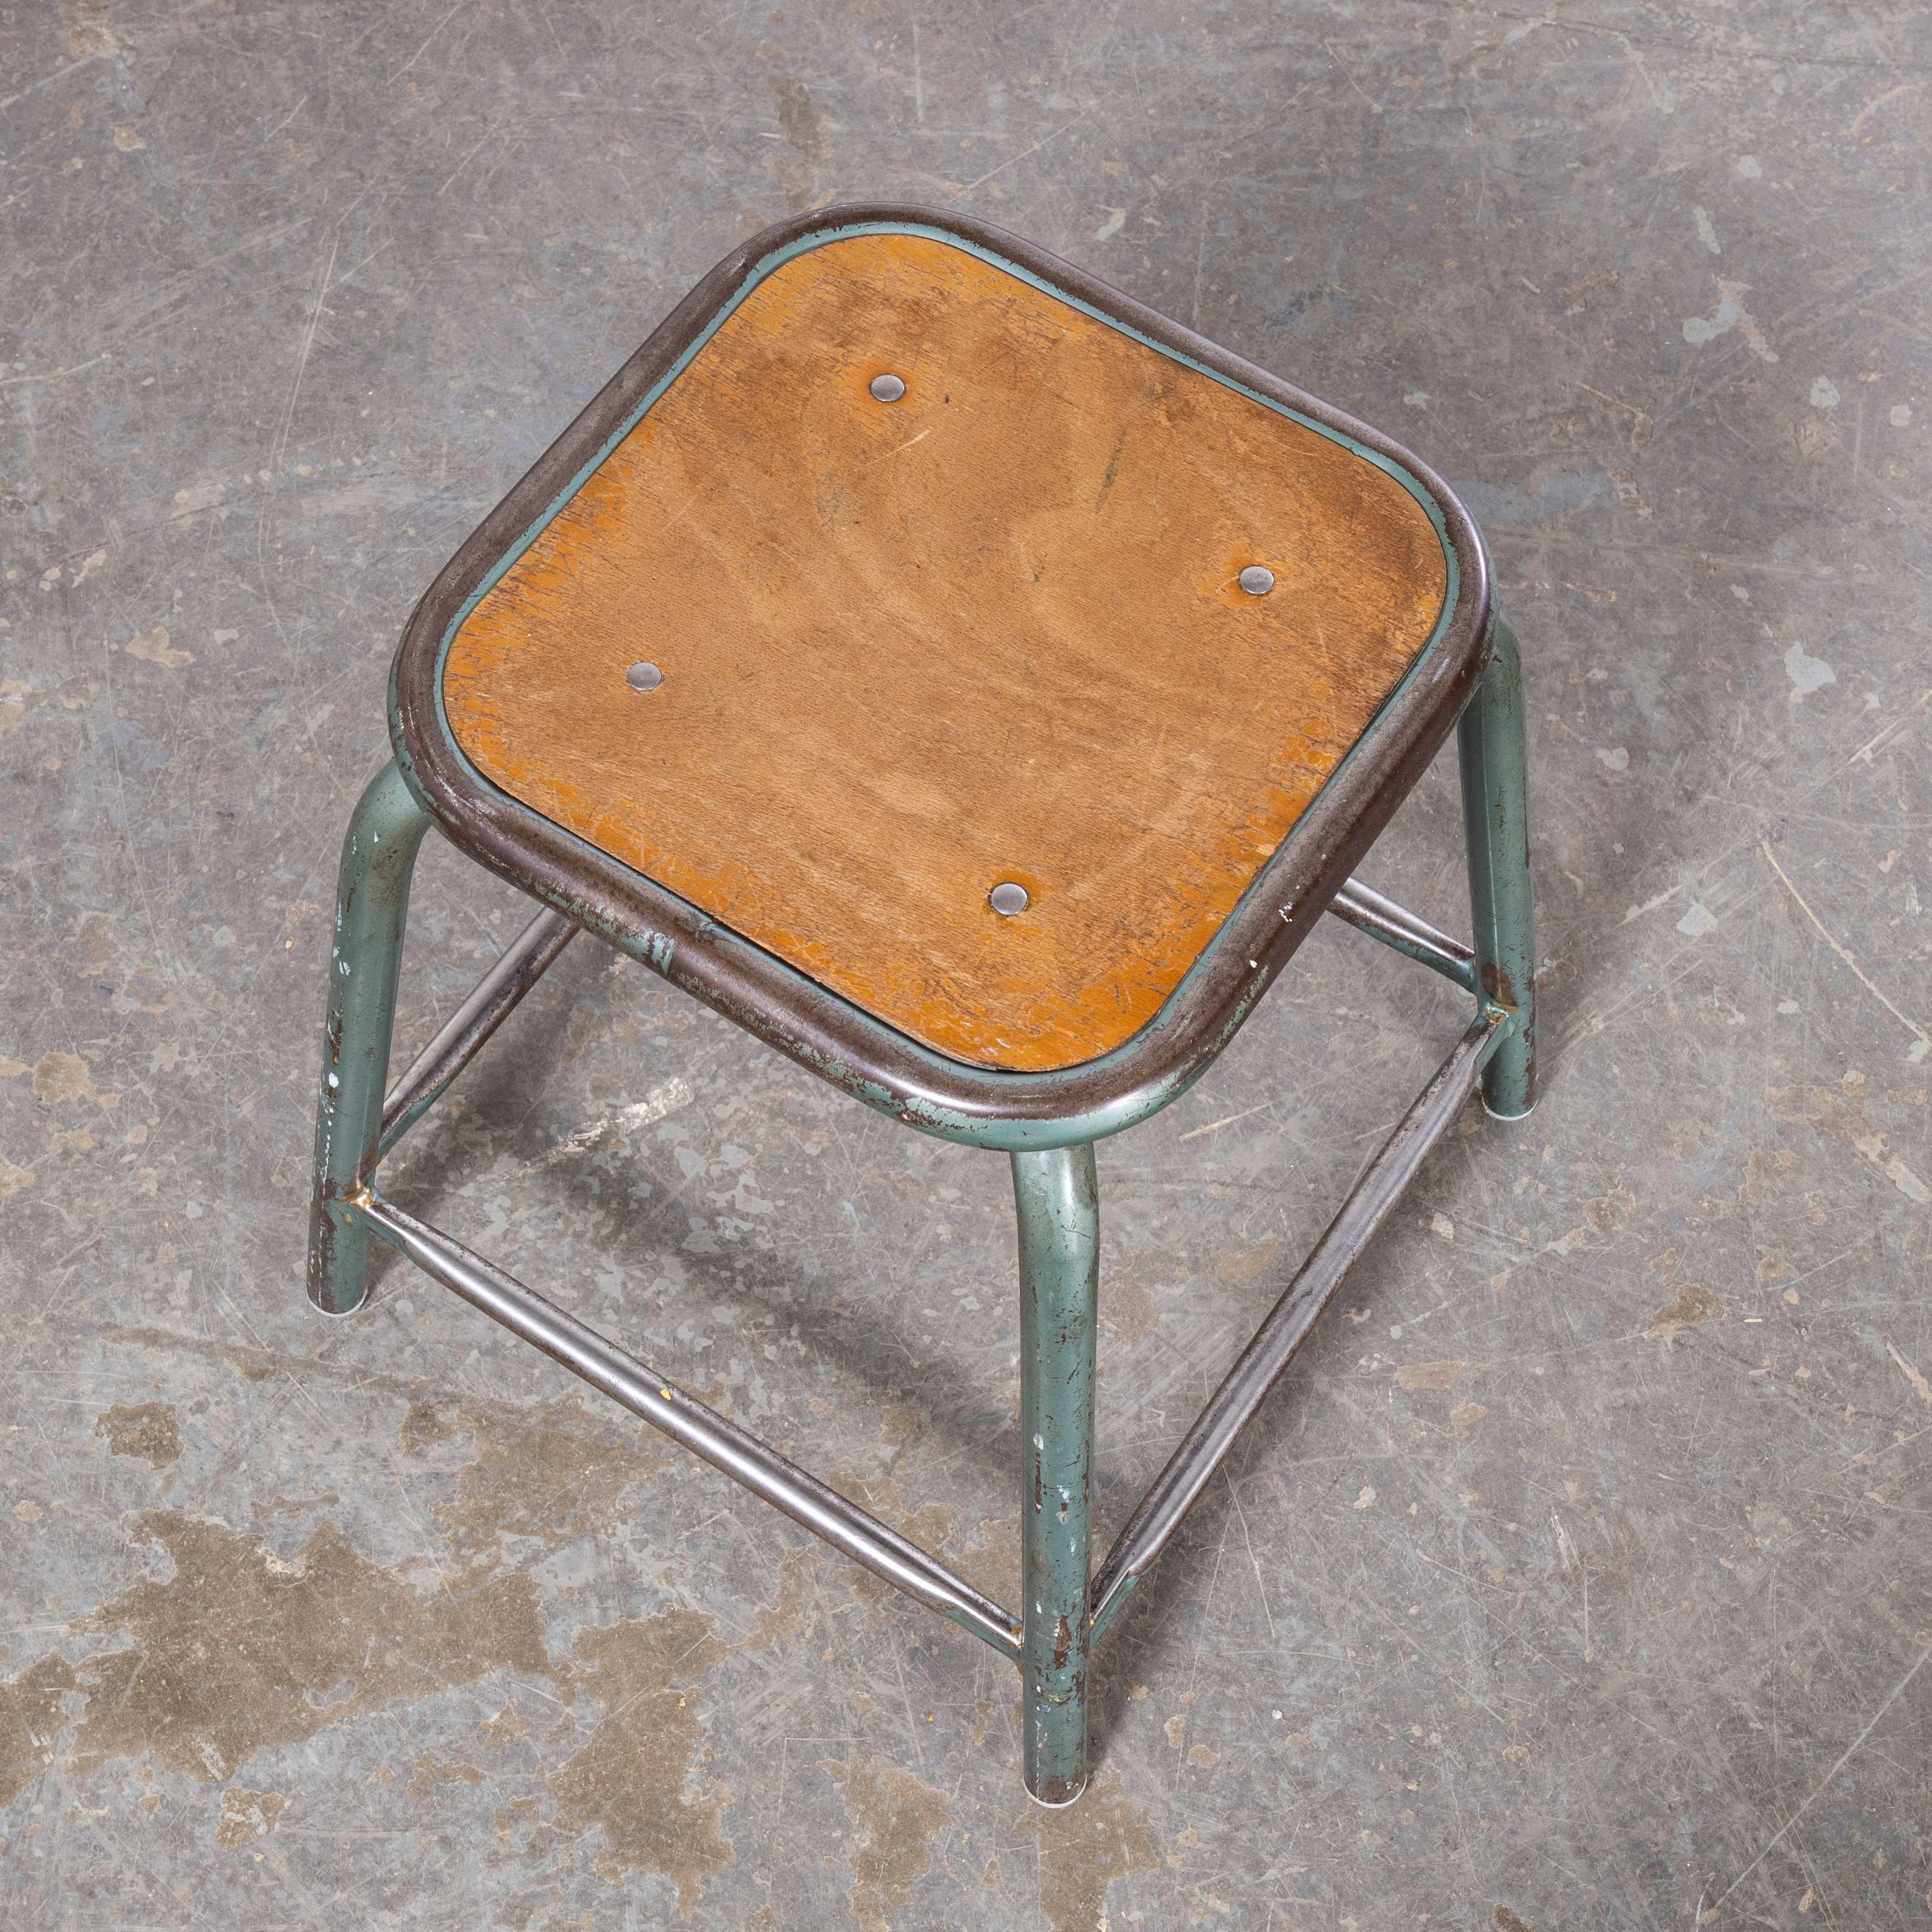 1960’s Mullca Low Stacking Stool – Aqua – Various Quantities Available
1960’s Mullca Low Stacking Stool – Aqua – Various Quantities Available. In 1947 Robert Muller and Gaston Cavaillon created the company that went on to develop arguably the most